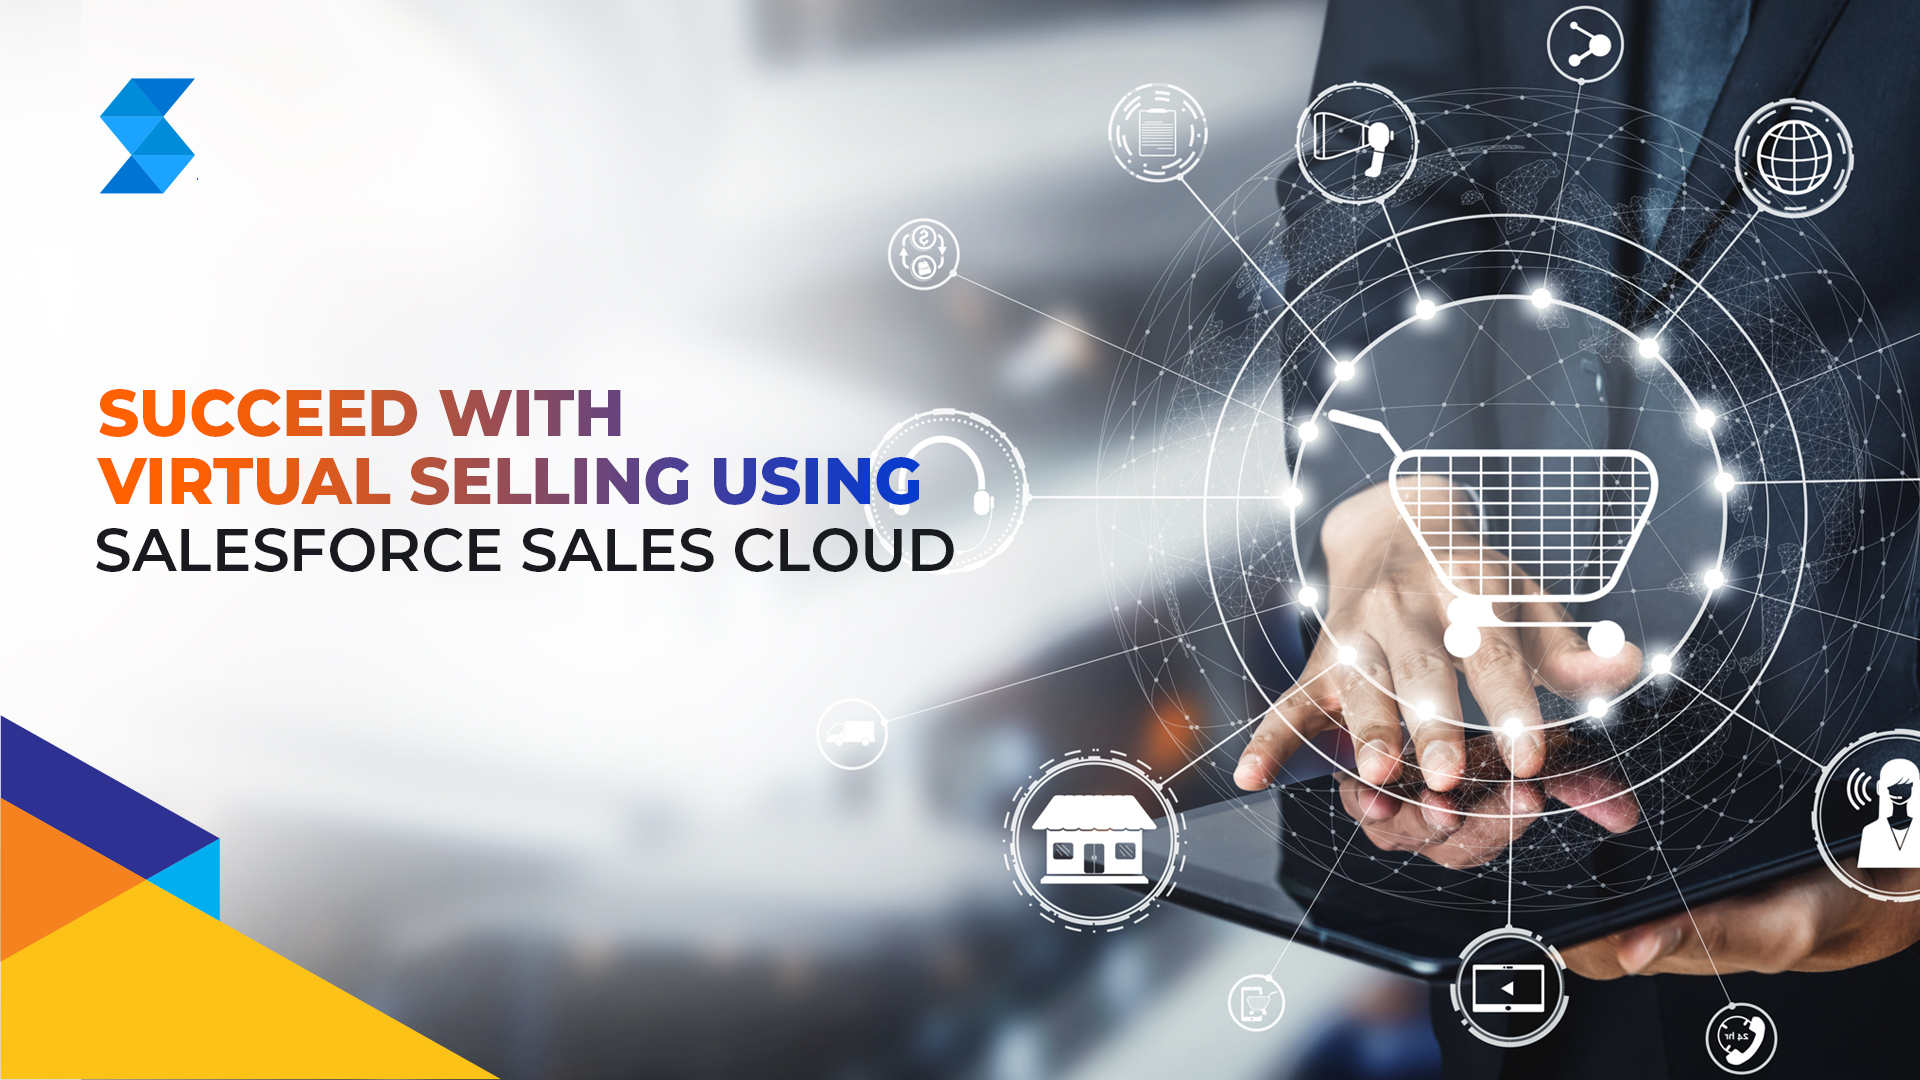 How to Succeed with Virtual Selling Using Salesforce Sales Cloud